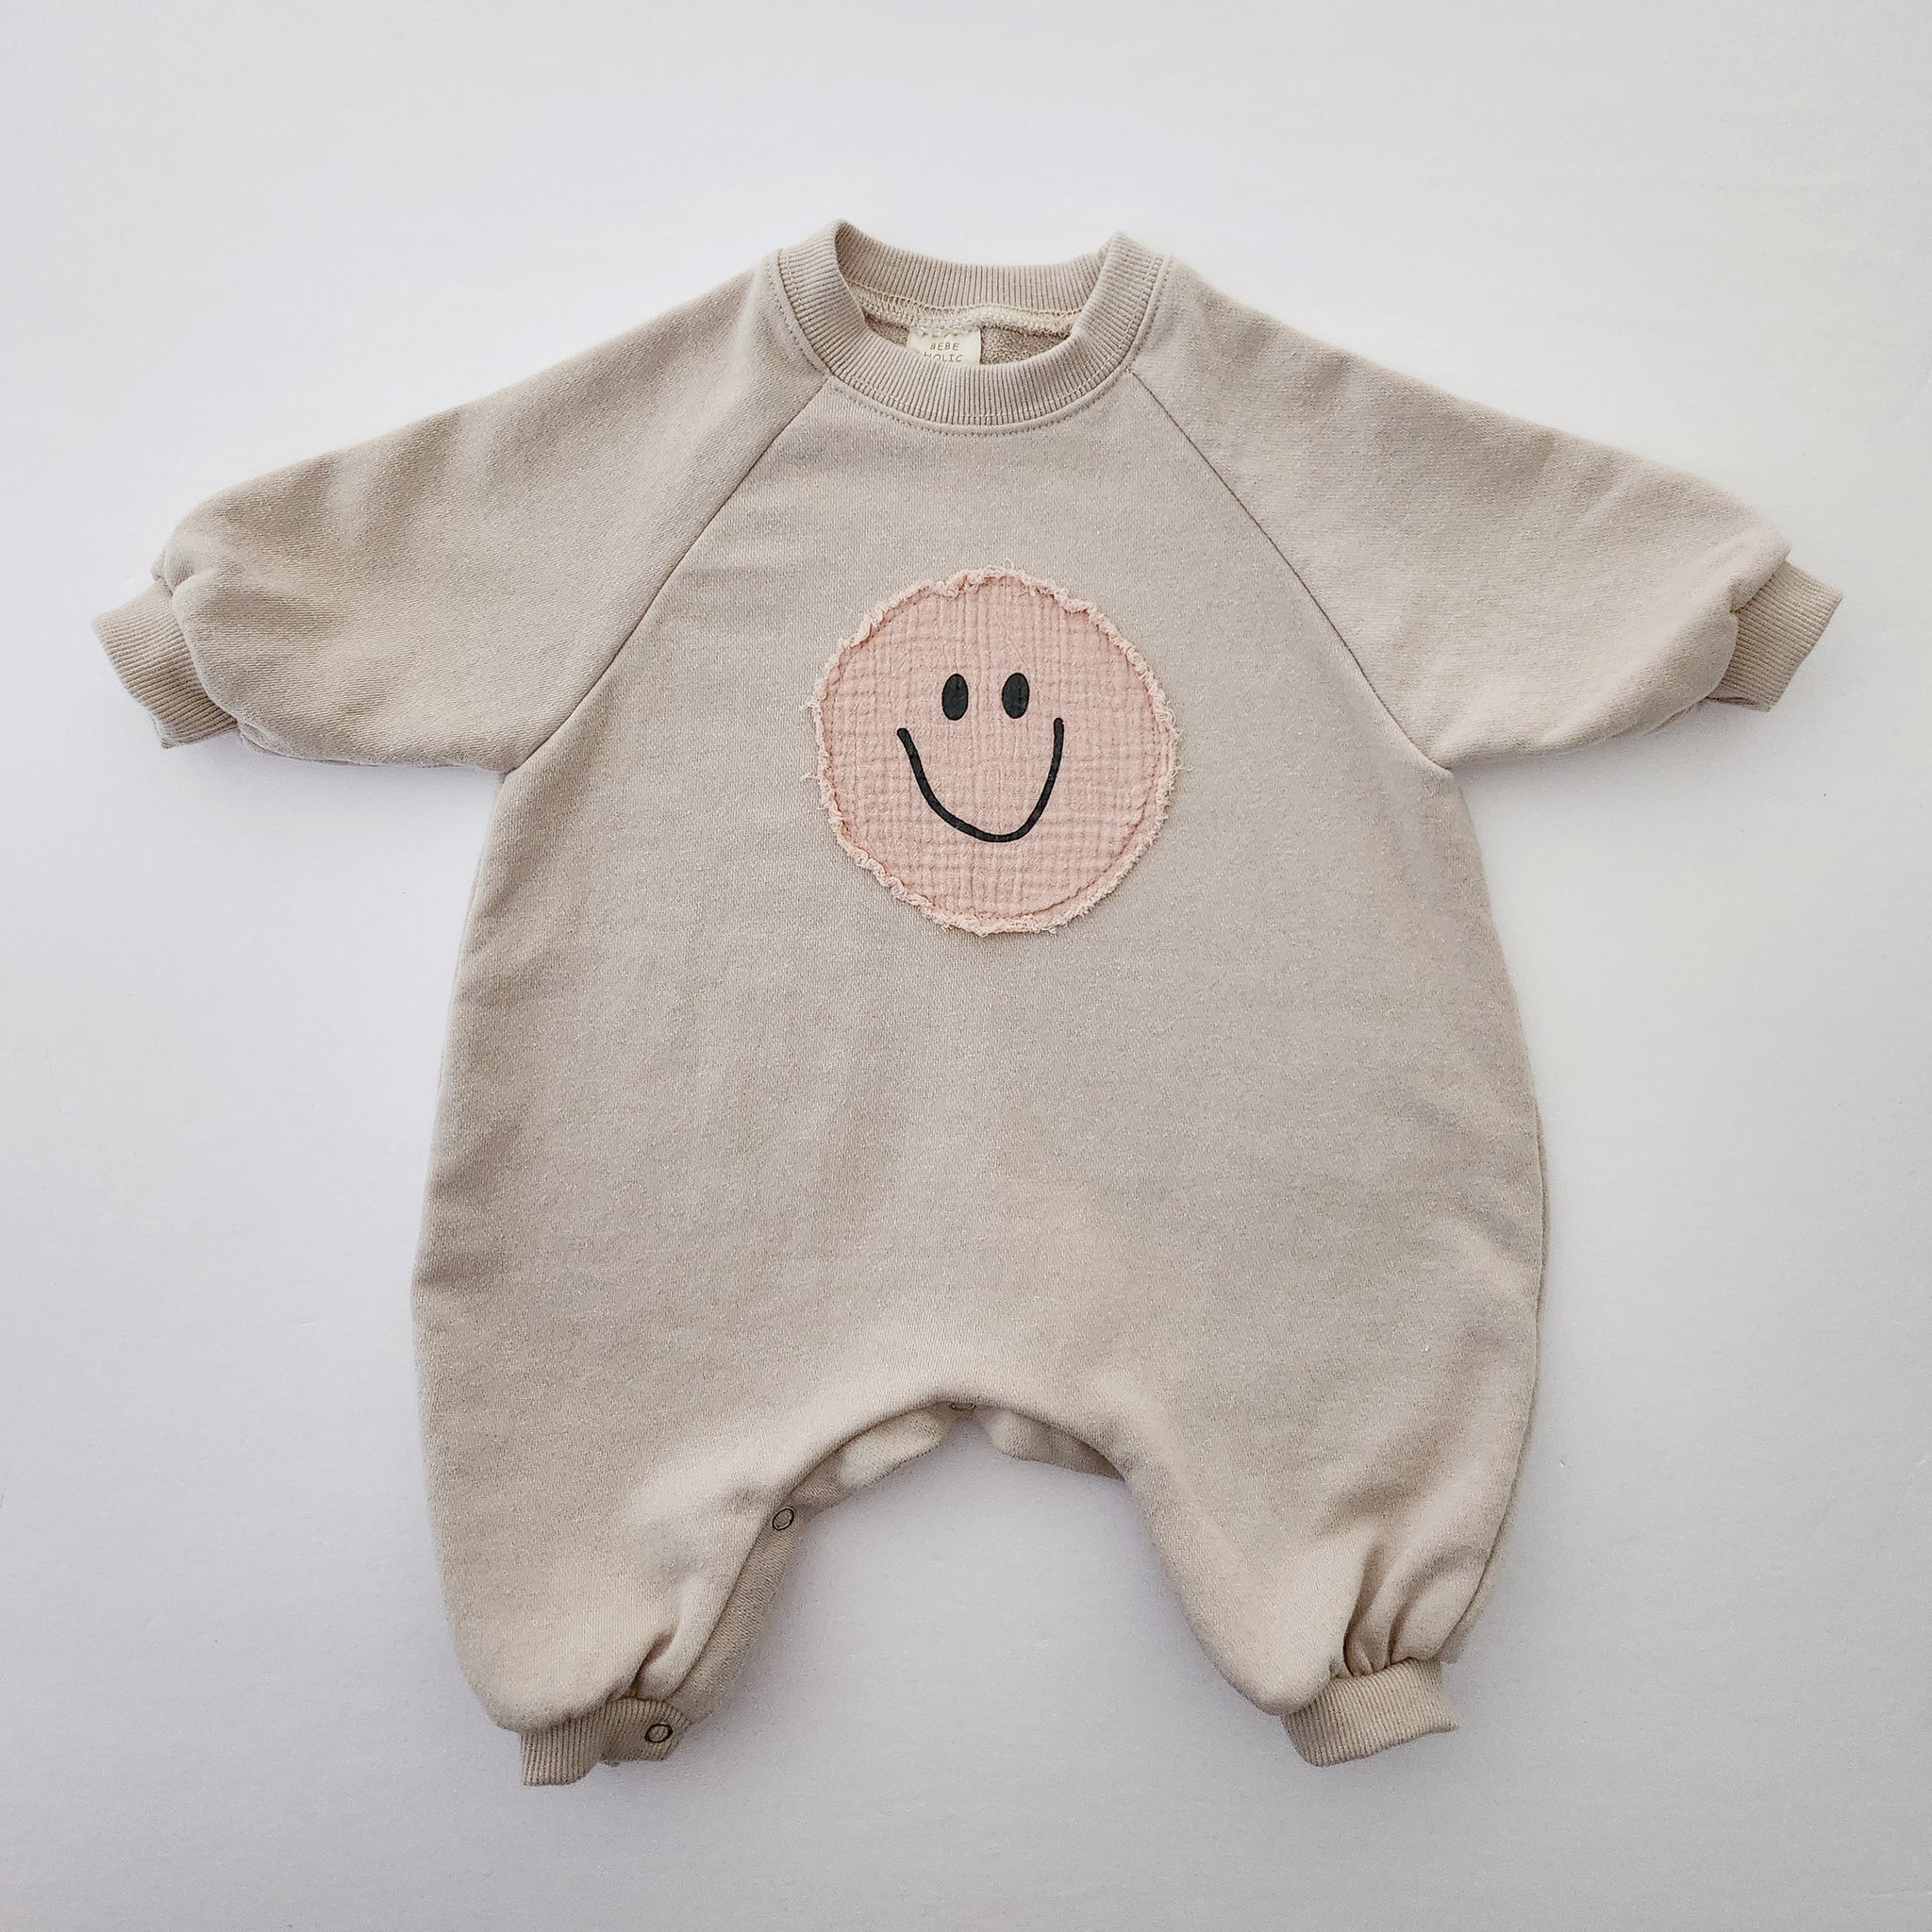 Baby BH Smiley Face Bodysuit (12-18m) - Pink Face - AT NOON STORE